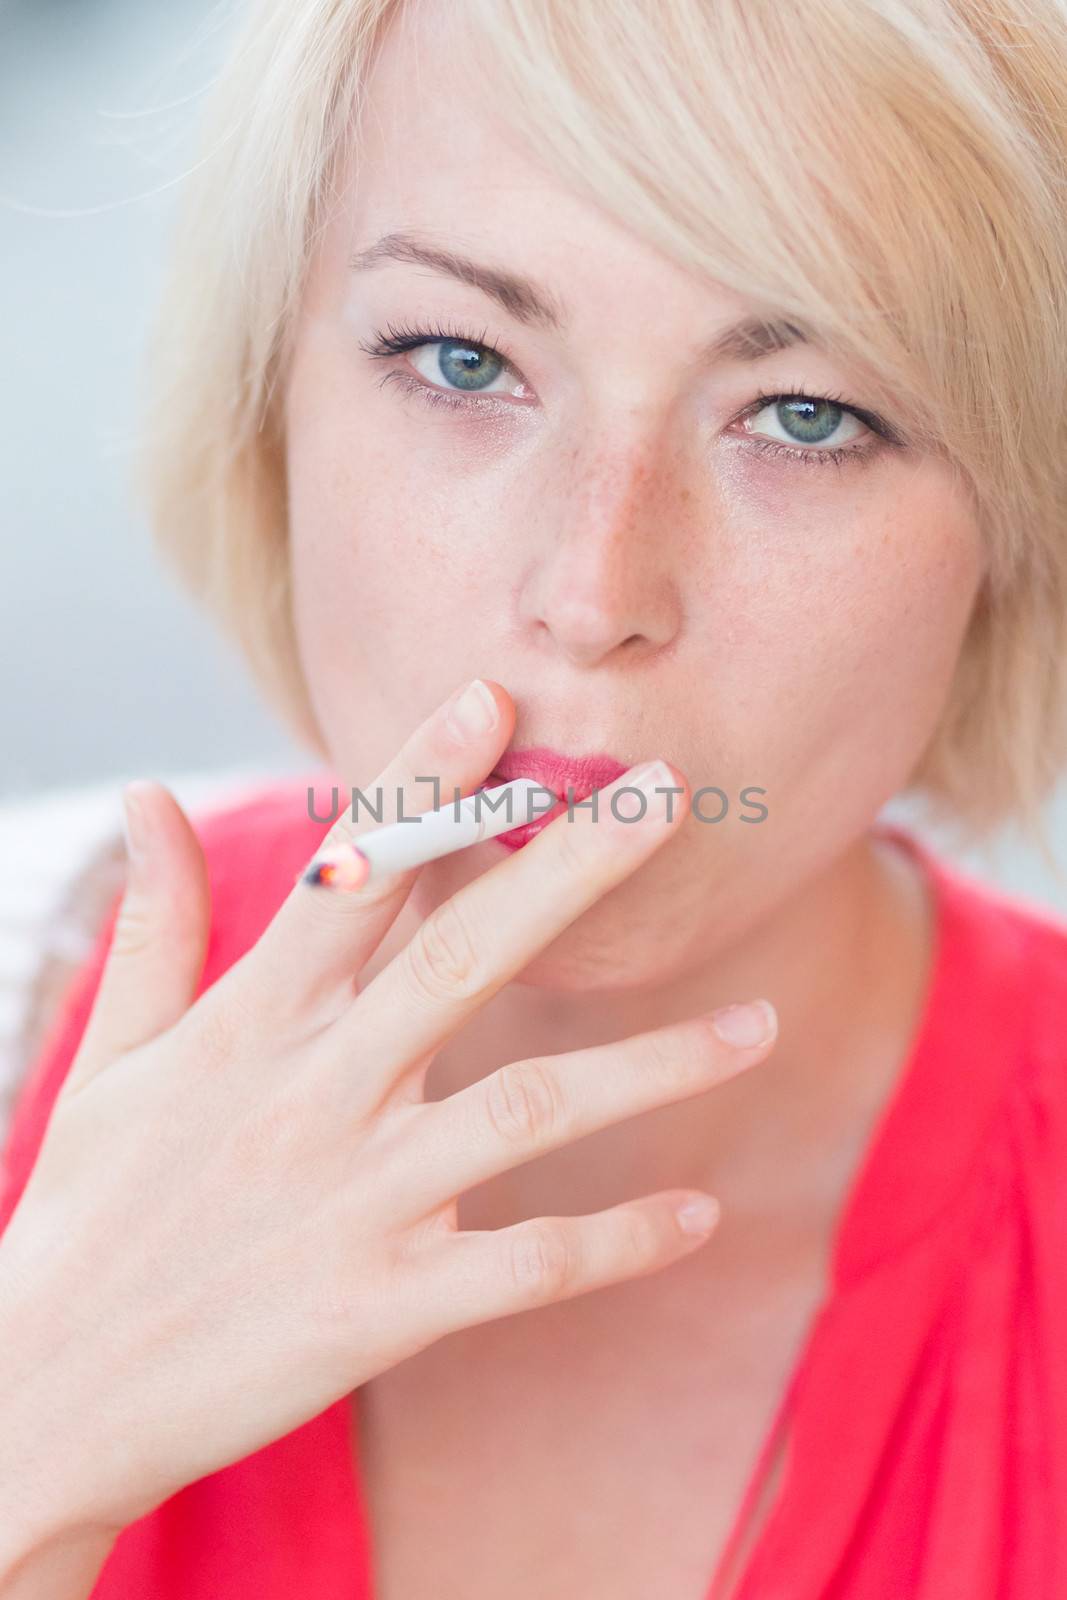 Young tobacco addicted woman smoking a cigarette.